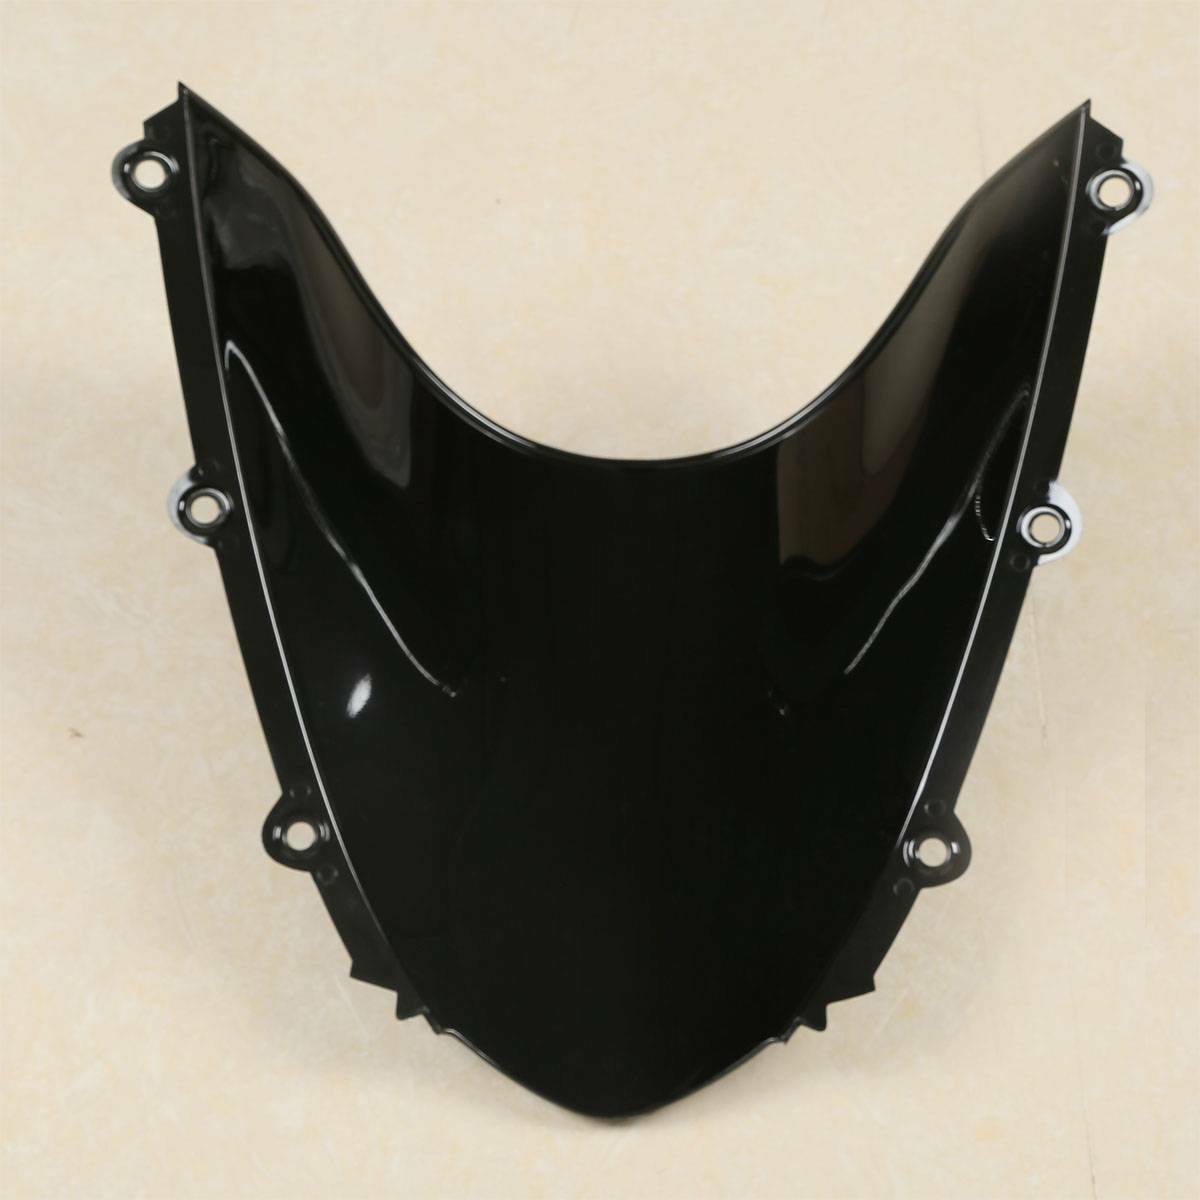 Windshield Windscreen Fit For Honda CBR1000RR 2004-2007 Black 04 2005 2006 2007 - Moto Life Products